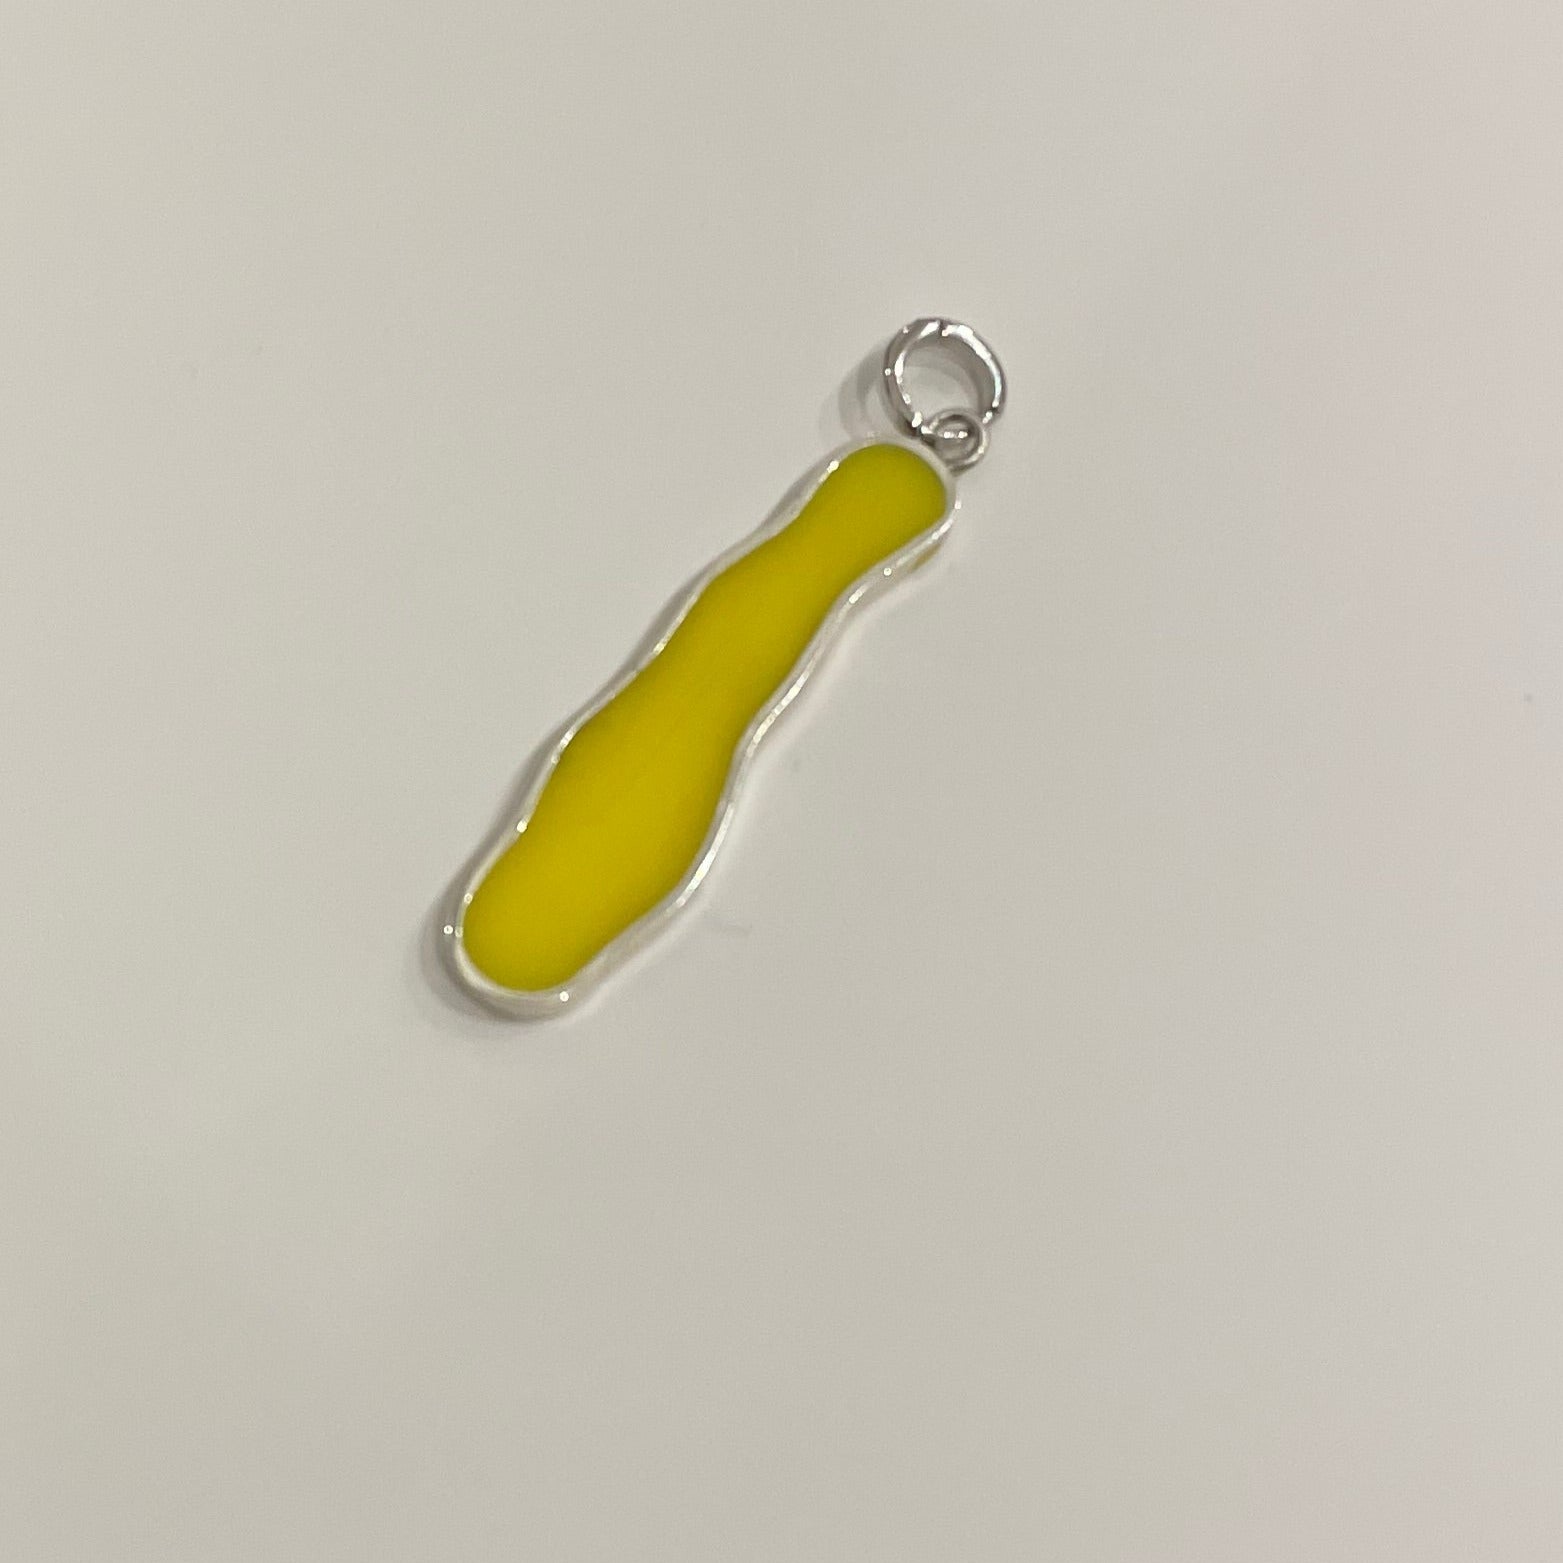 Long irregular shape clip-on charm made by silver and filed by yellow epoxy resin.